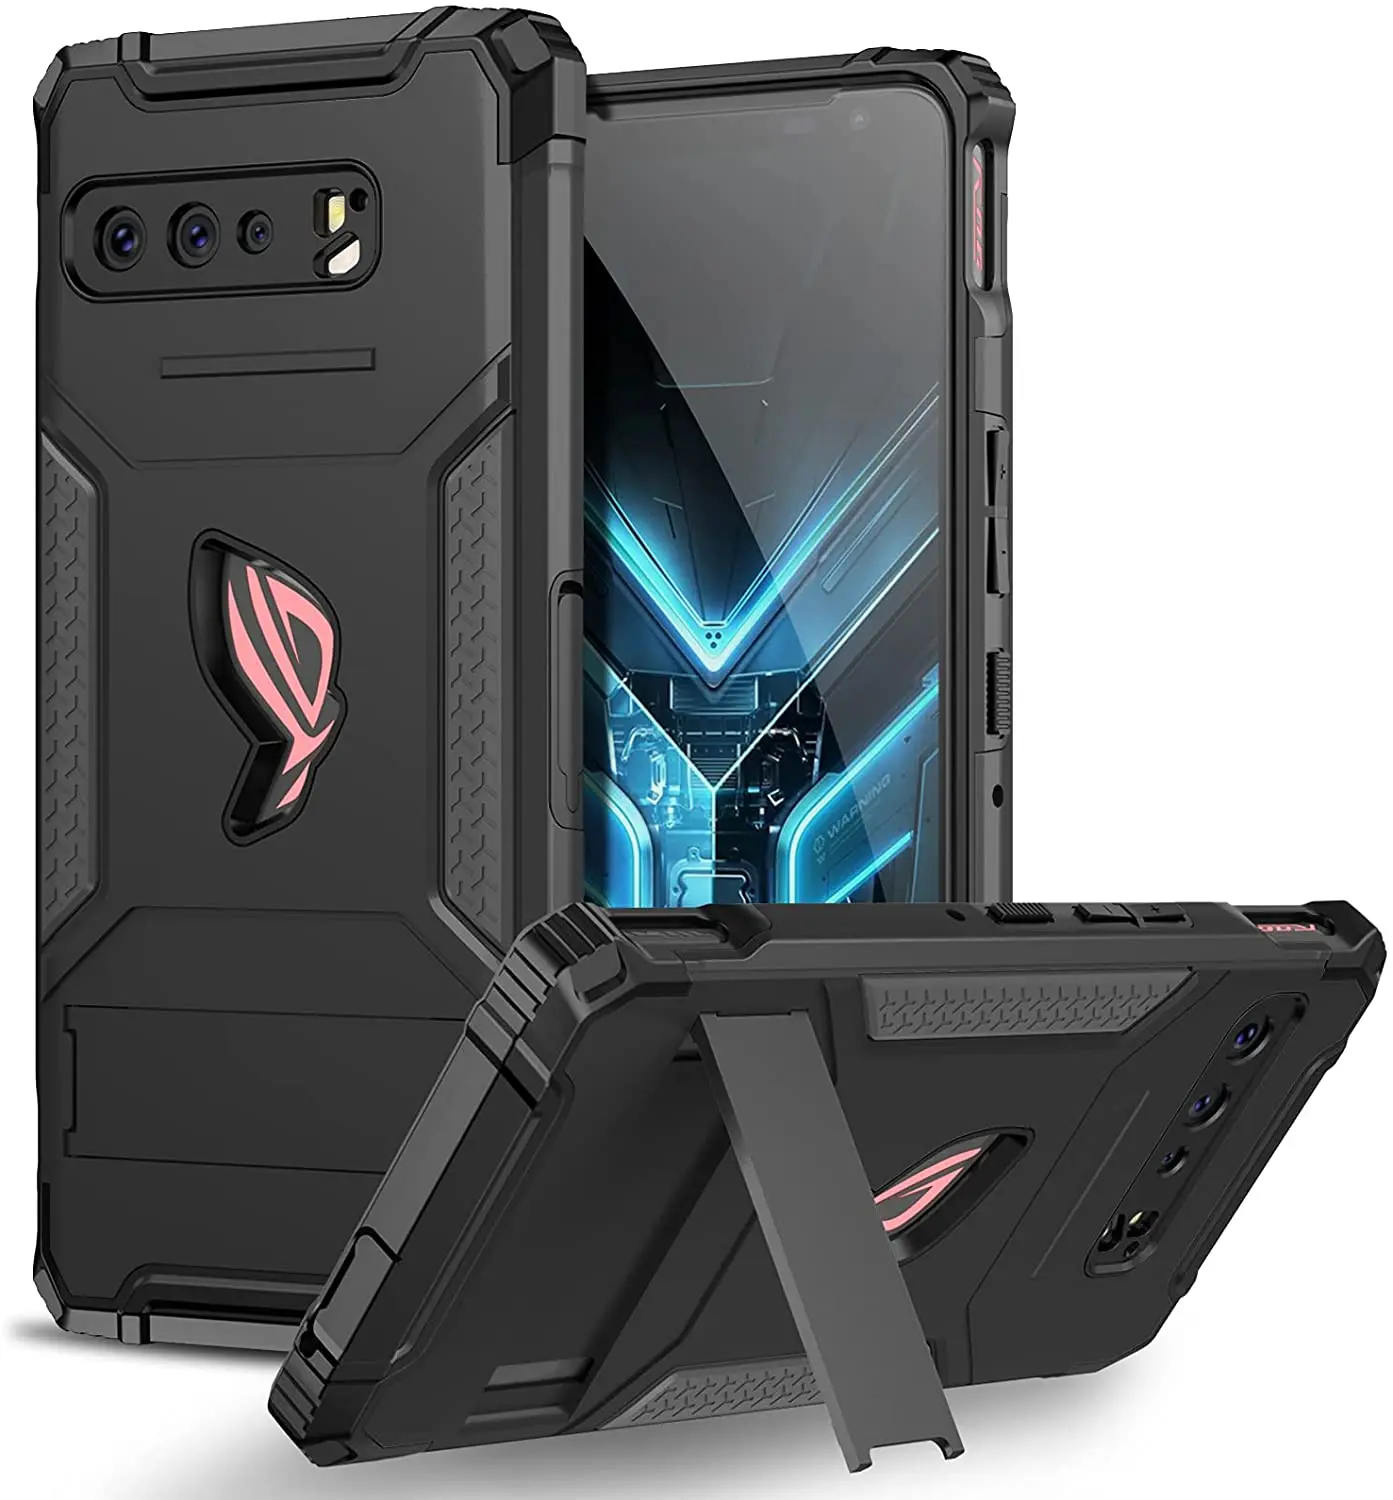 ZSHOW Armor Case for ASUS ROG Phone 3 ZS661KS Case Air Trigger Compatible with Kickstand Dust Plug Test Grade Drop Protection